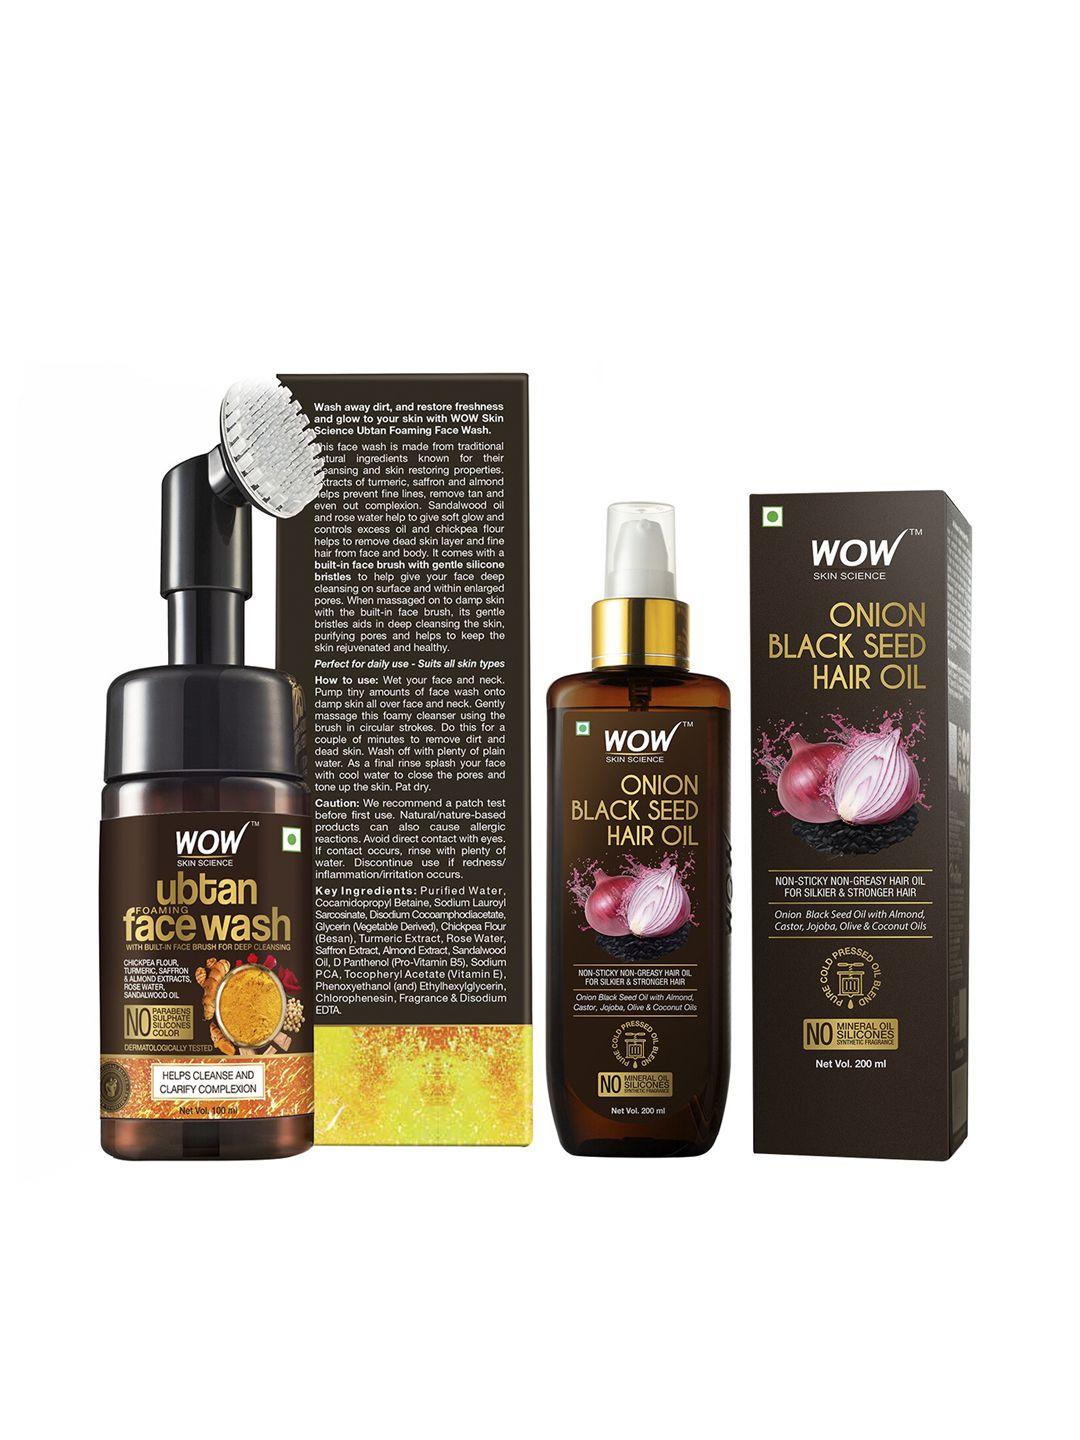 wow skin science set of onion black seed hair oil & ubtan foaming face wash